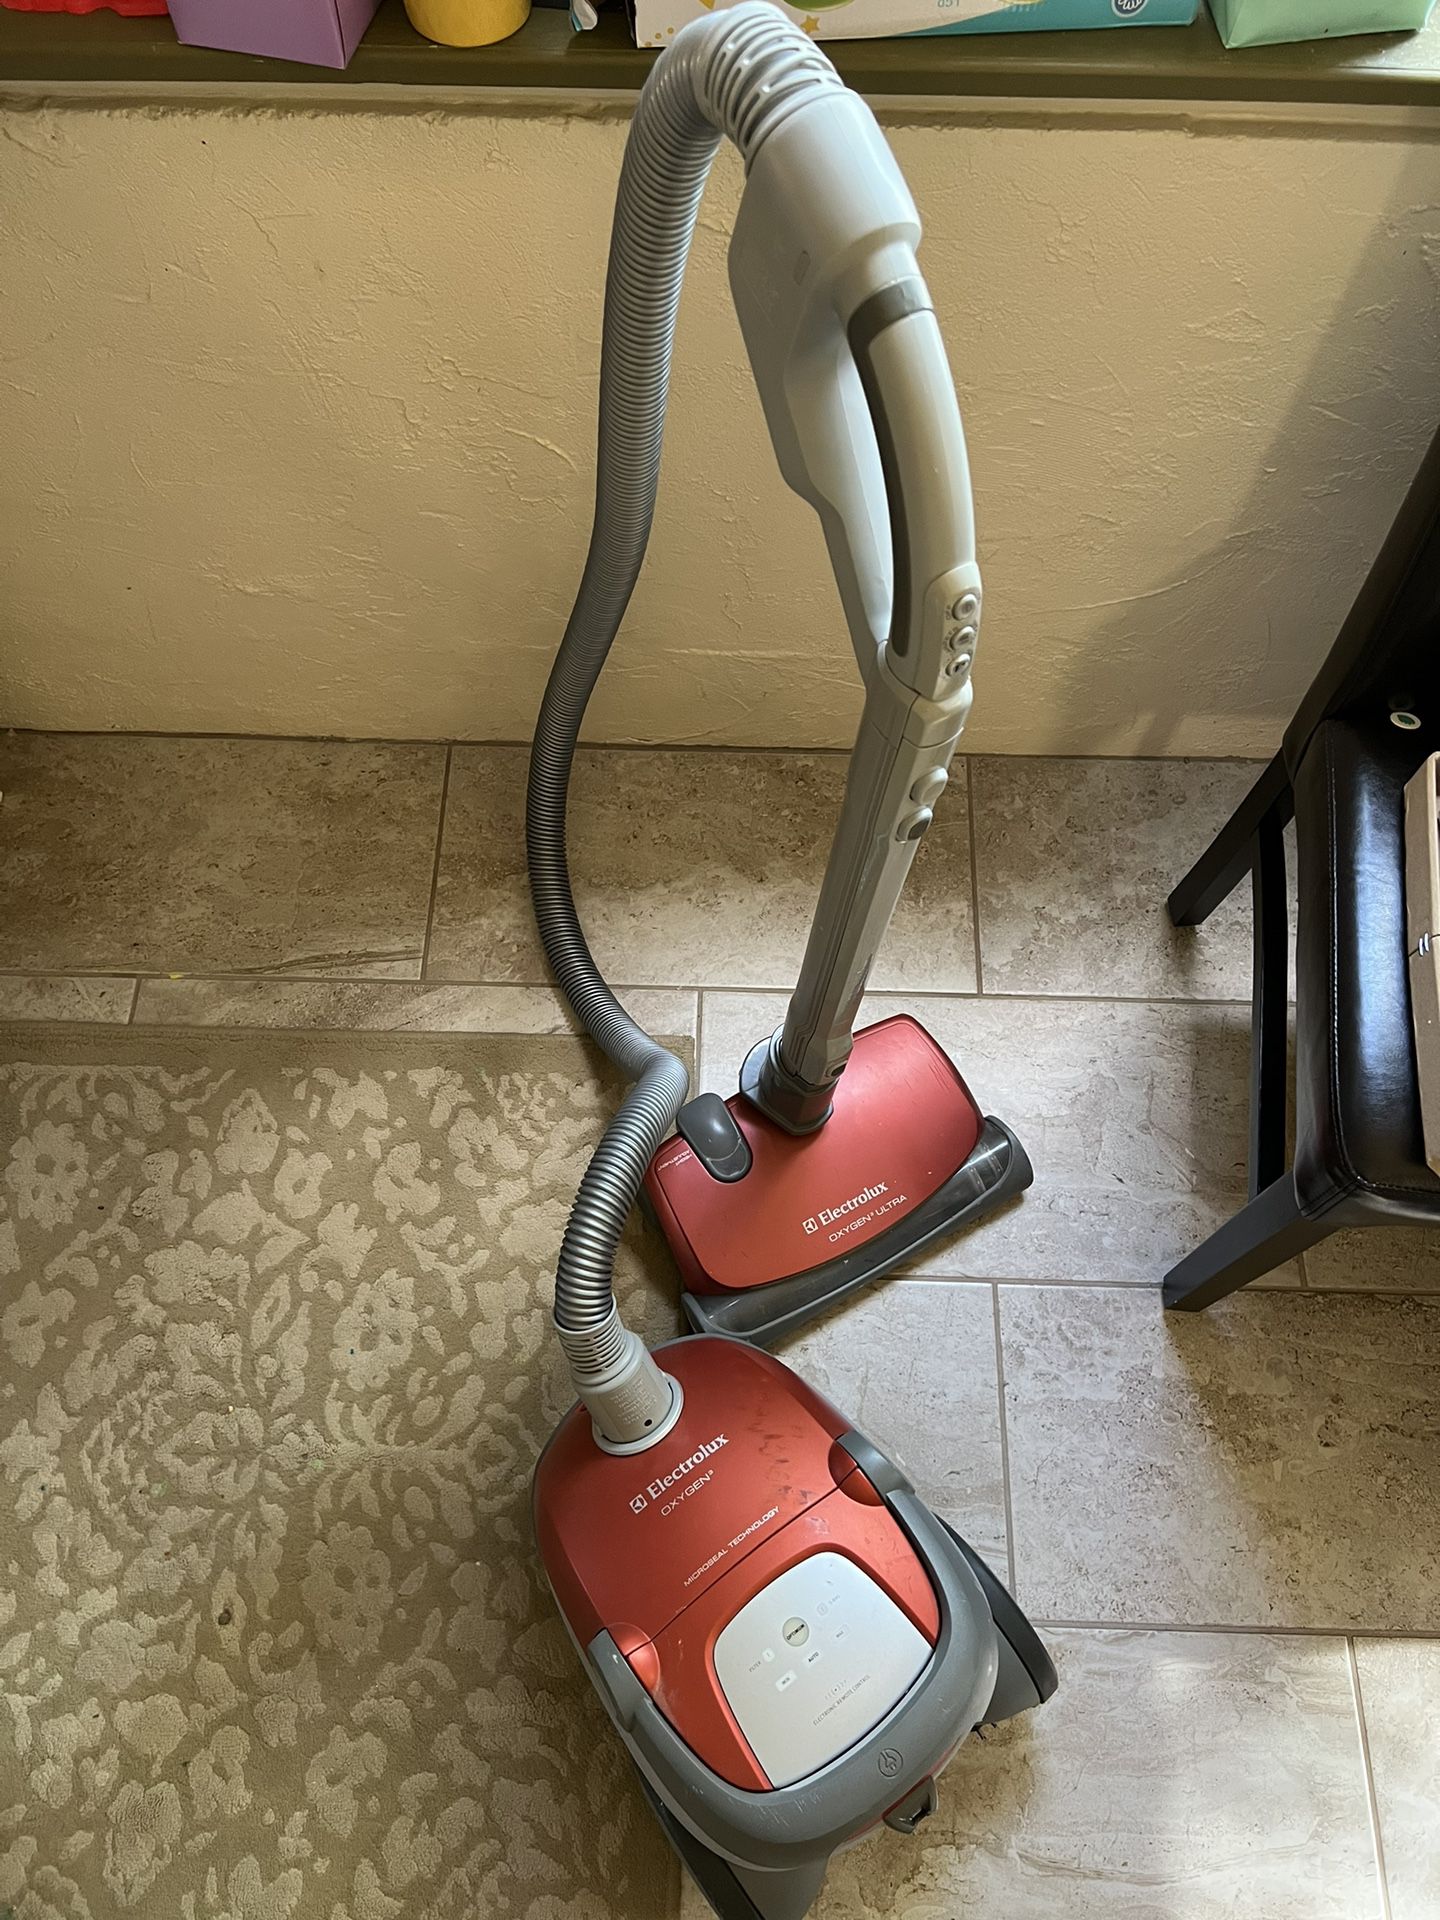 Electrolux Canister Vacuum